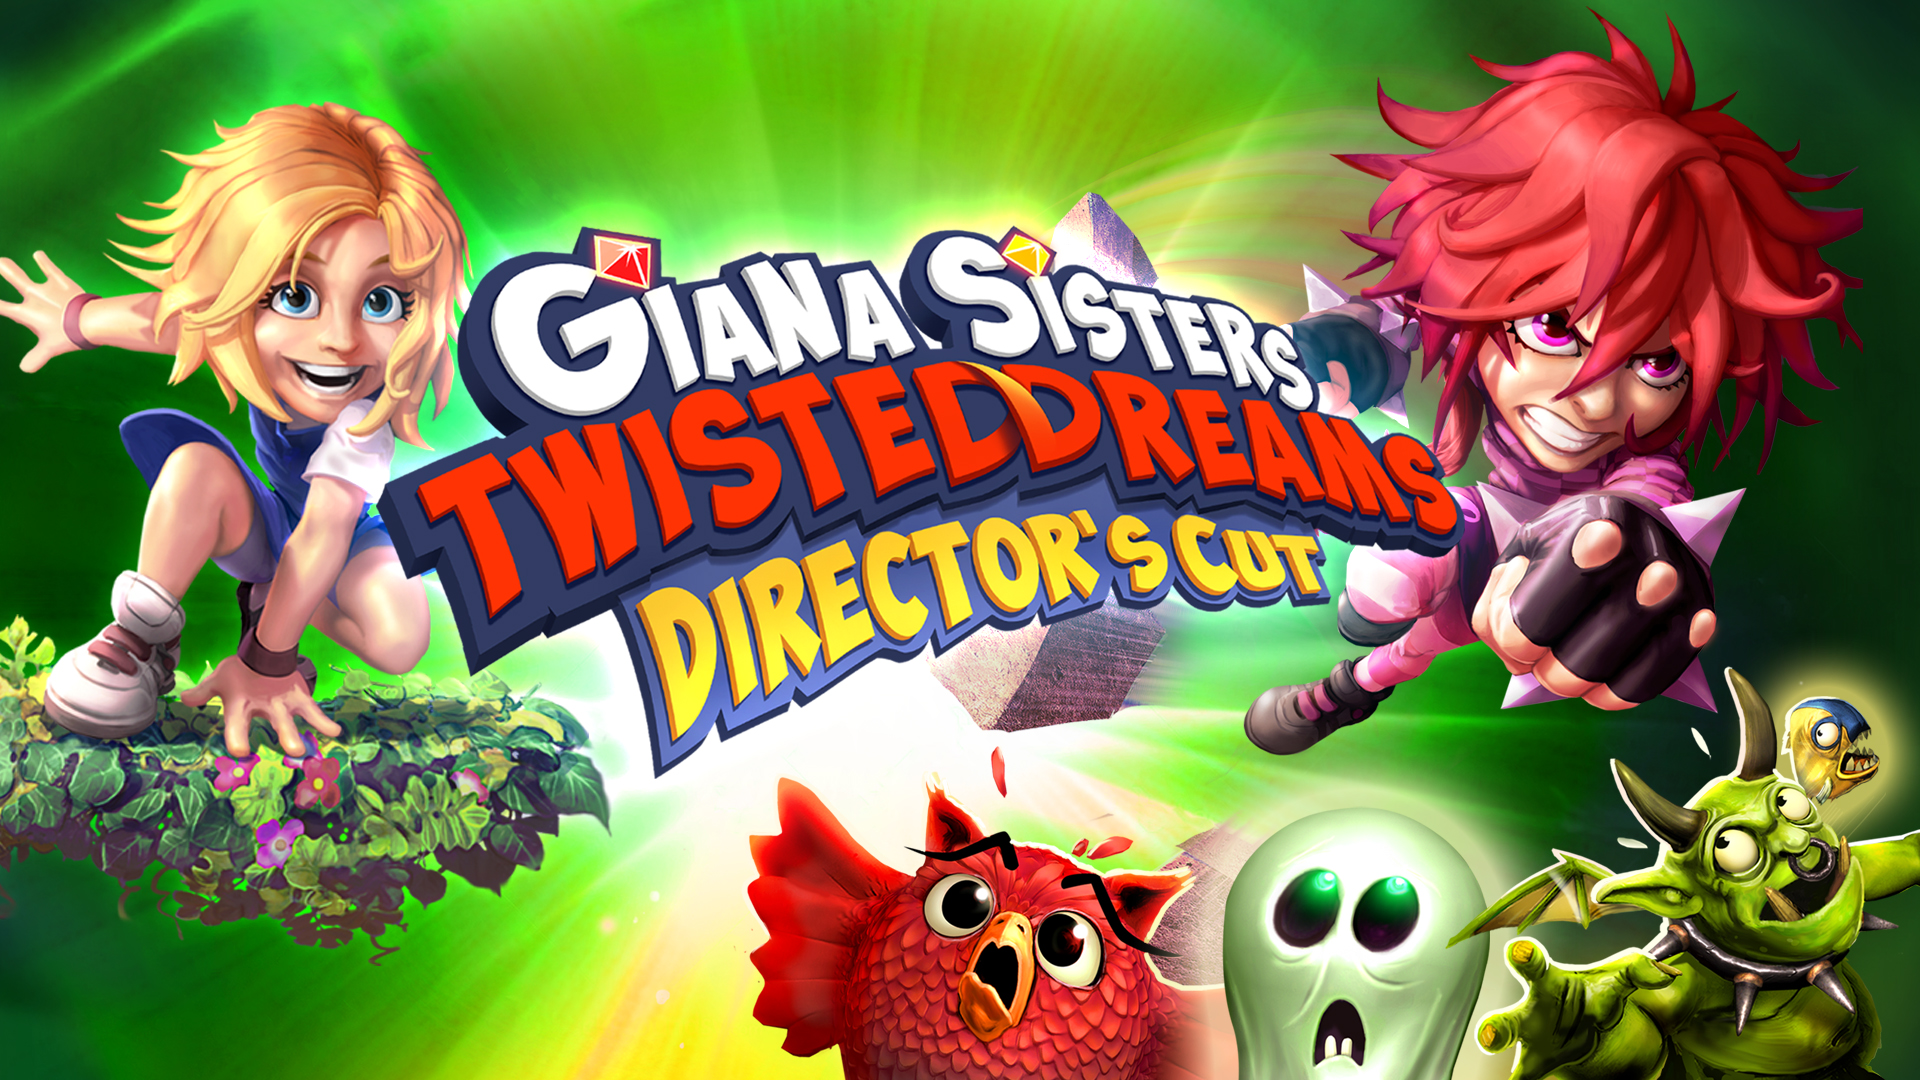 Giana Sisters: Twisted Dreams Wallpapers